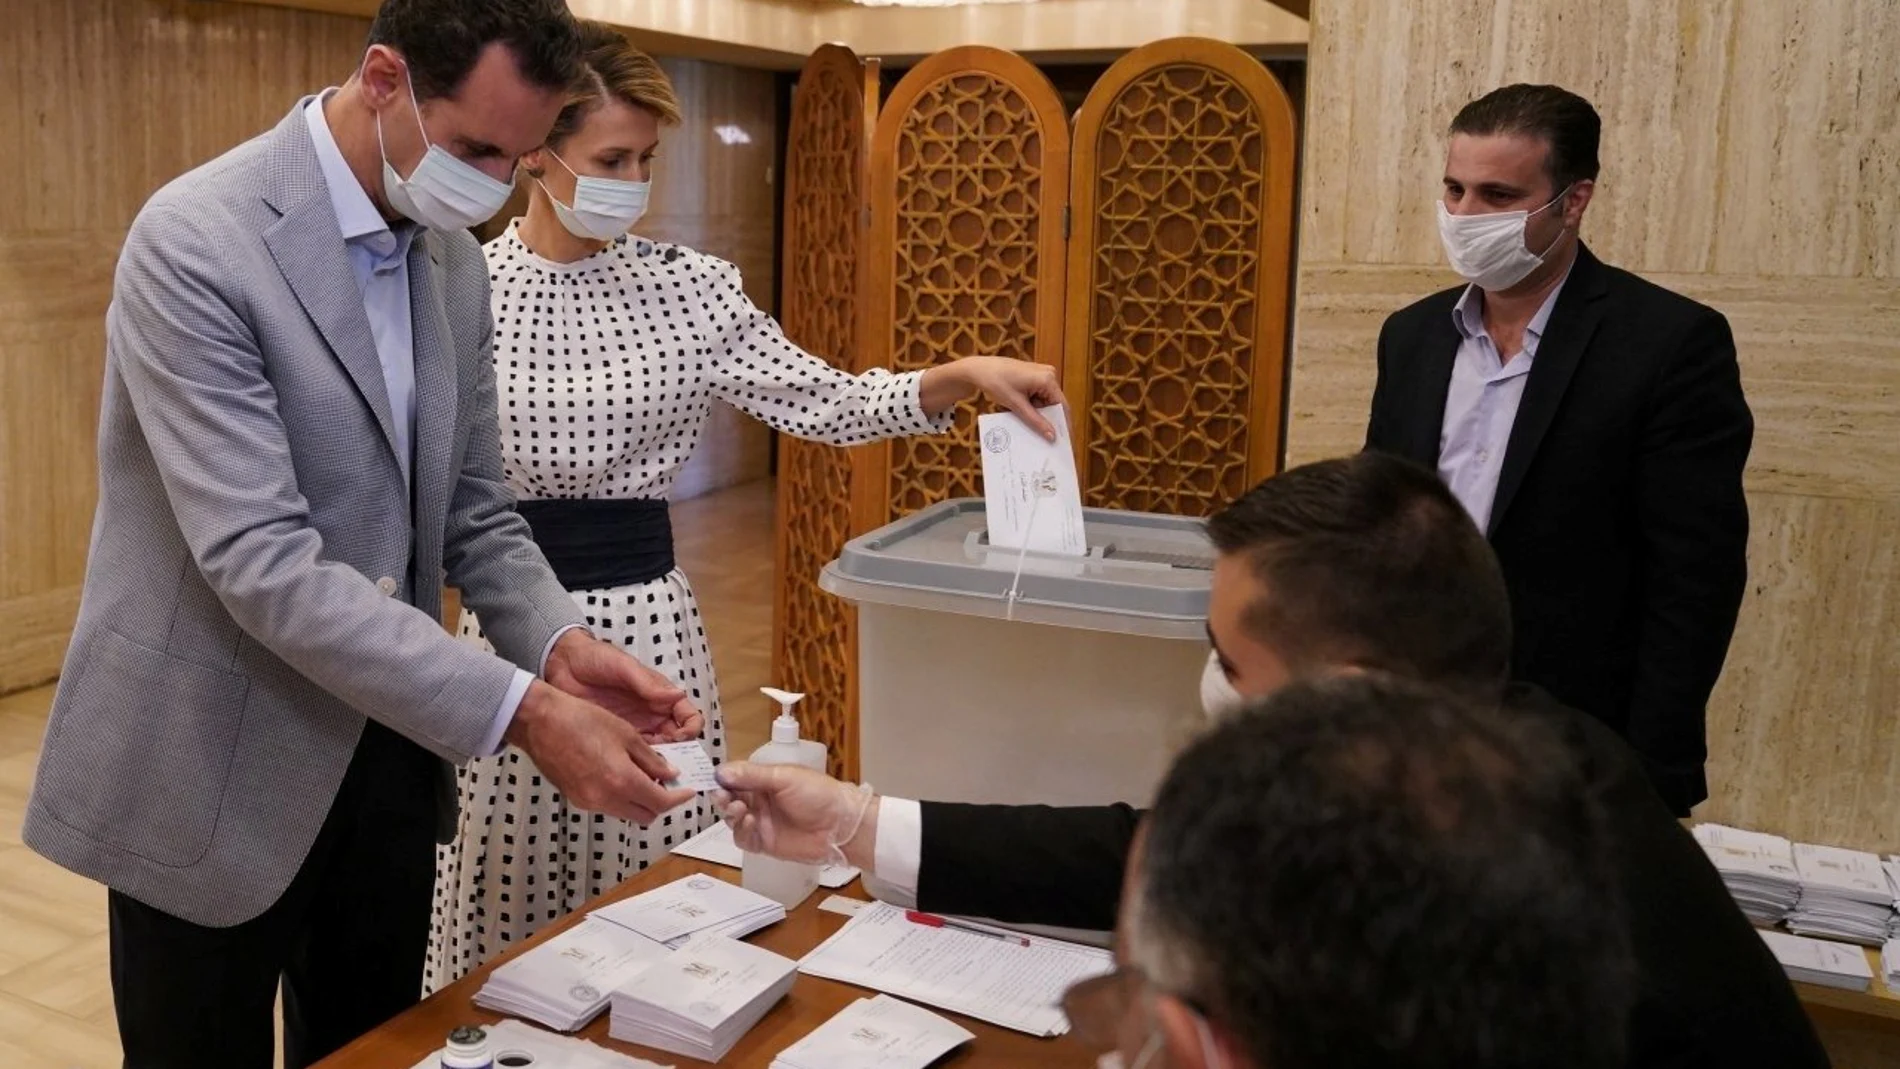 Syria's President Bashar al-Assad and his wife Asma cast their vote inside a polling station during the parliamentary elections in Damascus